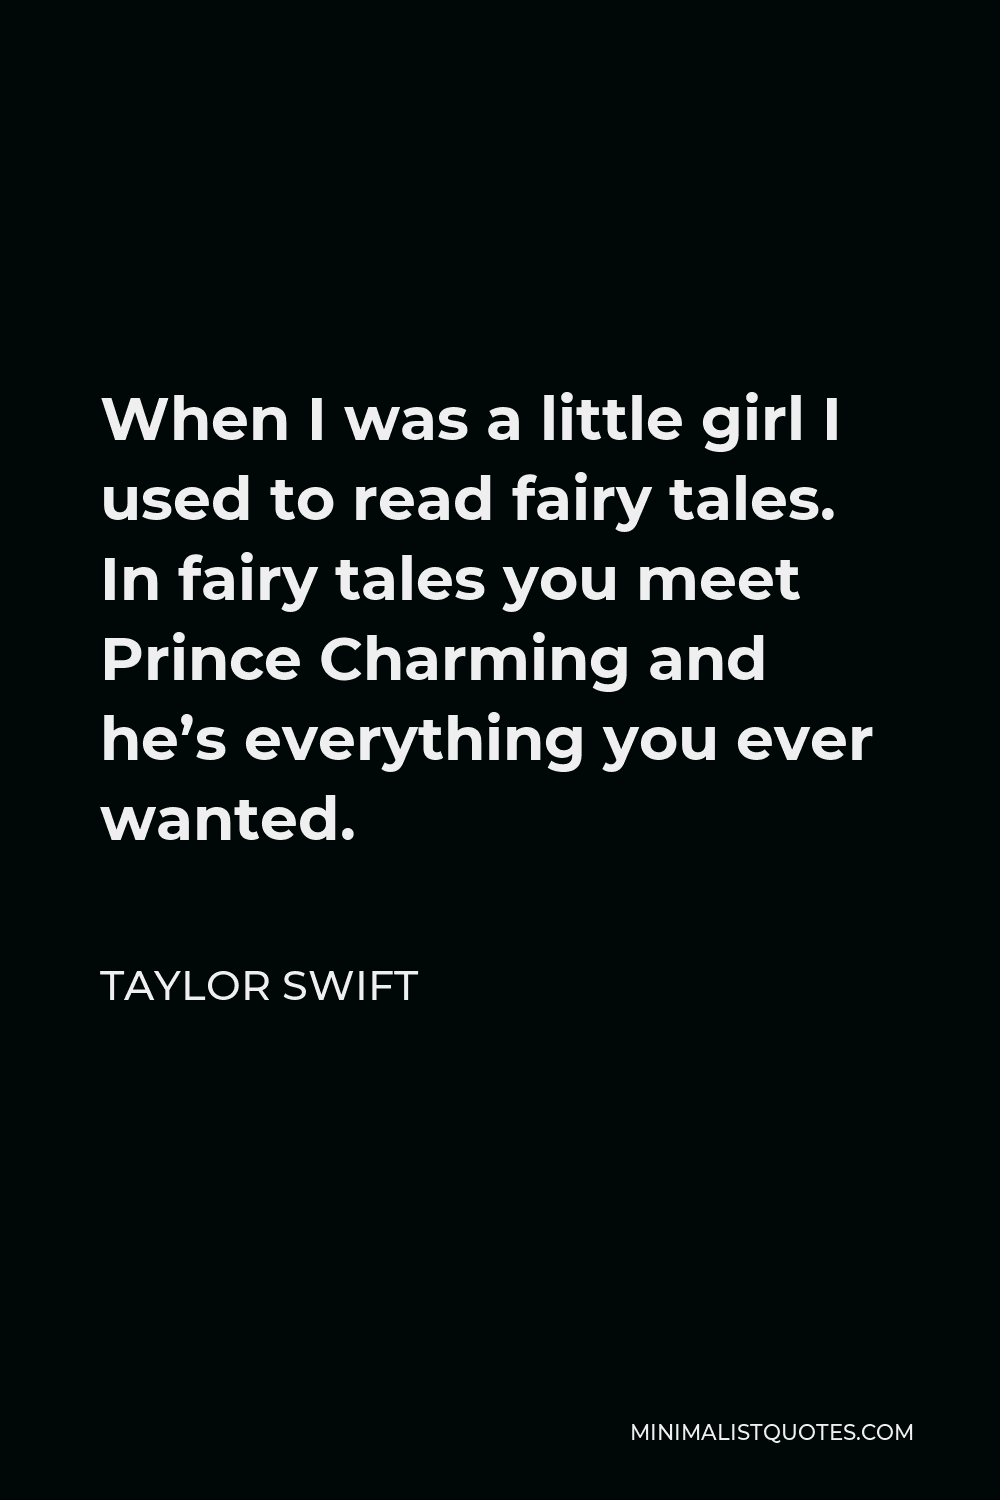 Taylor Swift Quote - When I was a little girl I used to read fairy tales. In fairy tales you meet Prince Charming and he’s everything you ever wanted.